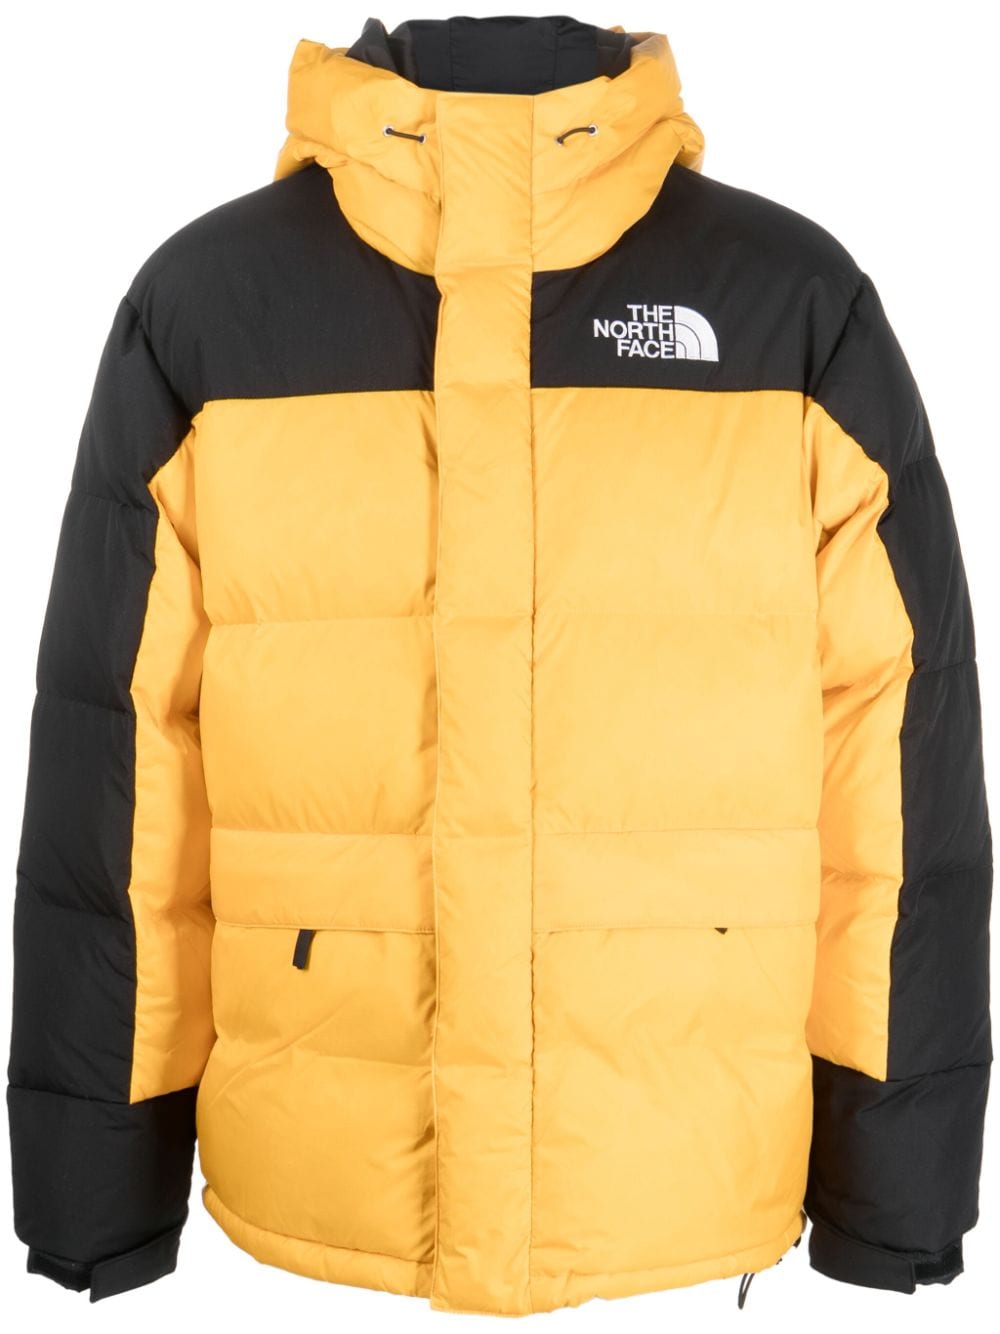 The North Face Himalayan hooded padded jacket - Yellow von The North Face